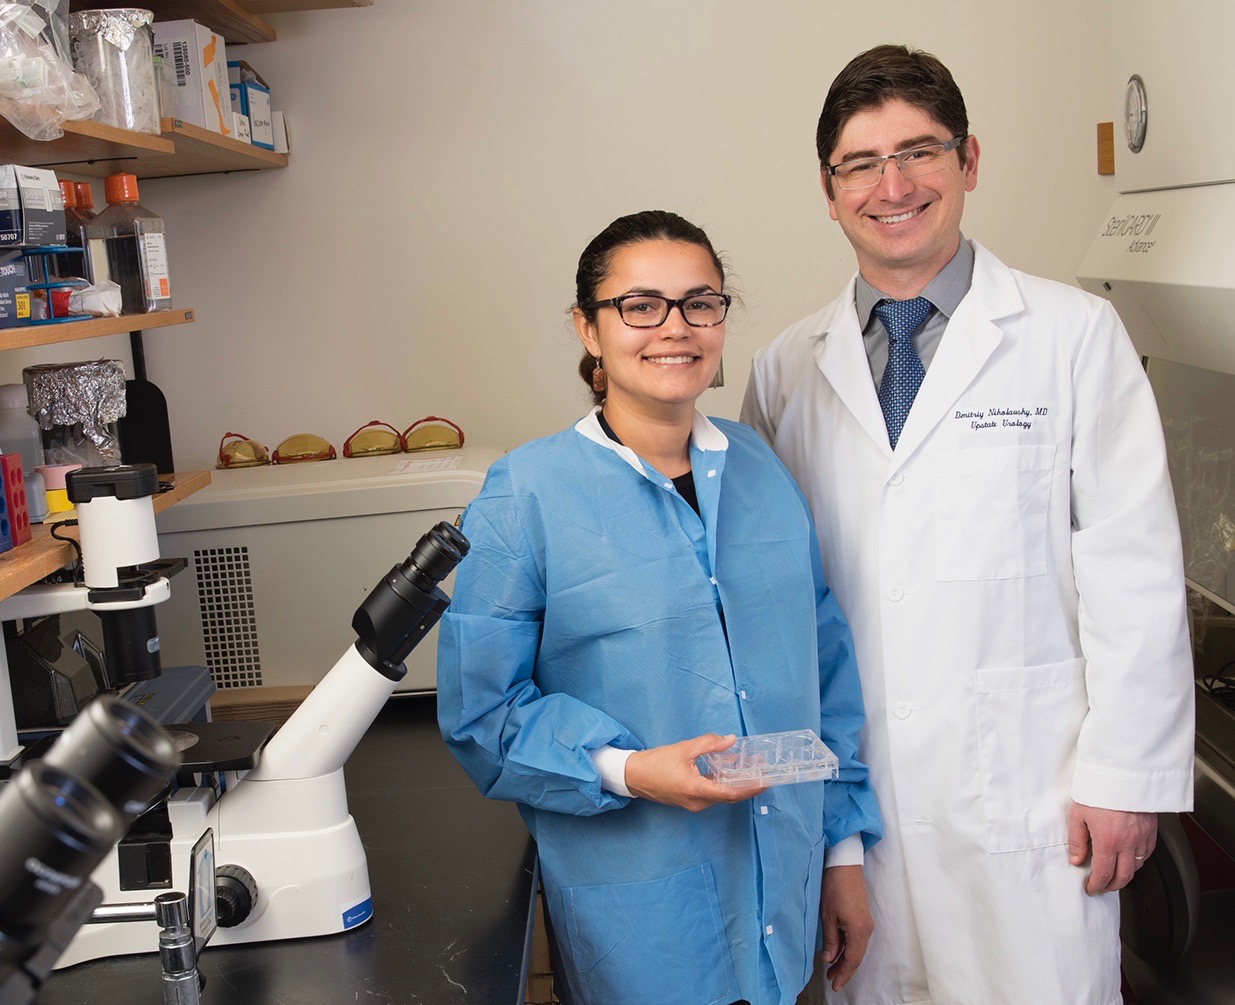 Dmitriy Nikolavsky, MD, is director of reconstructive urology at Upstate University Hospital. He has completed more than 250 urethral reconstructions over the past four years. He is shown with his wife, Daniela Nikolavsky, who works in the urology laboratory. (PHOTO BY SUSAN KAHN)